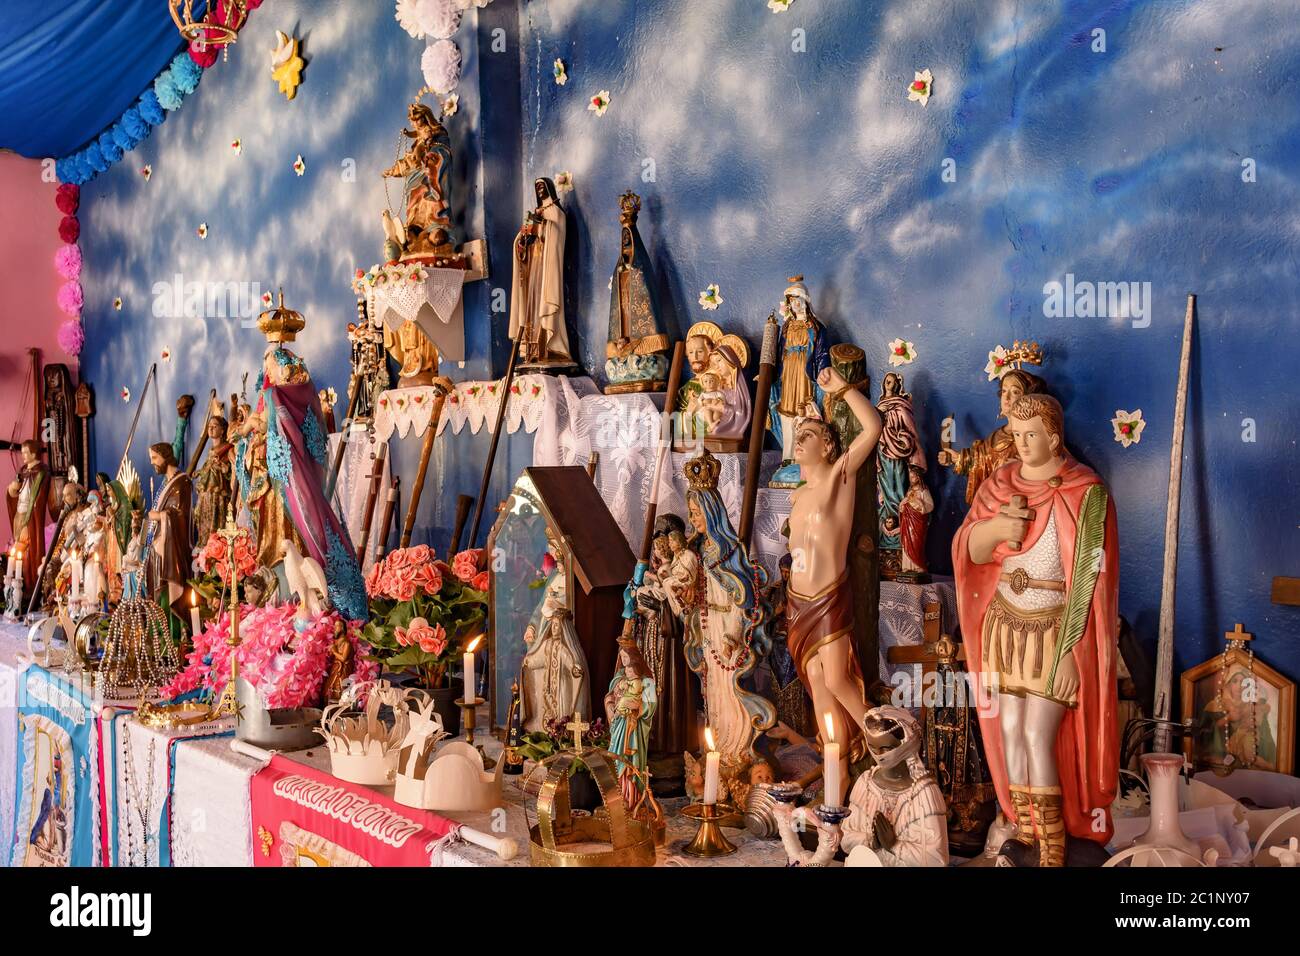 Religious altar with saints from diverse backgrounds represented Stock Photo